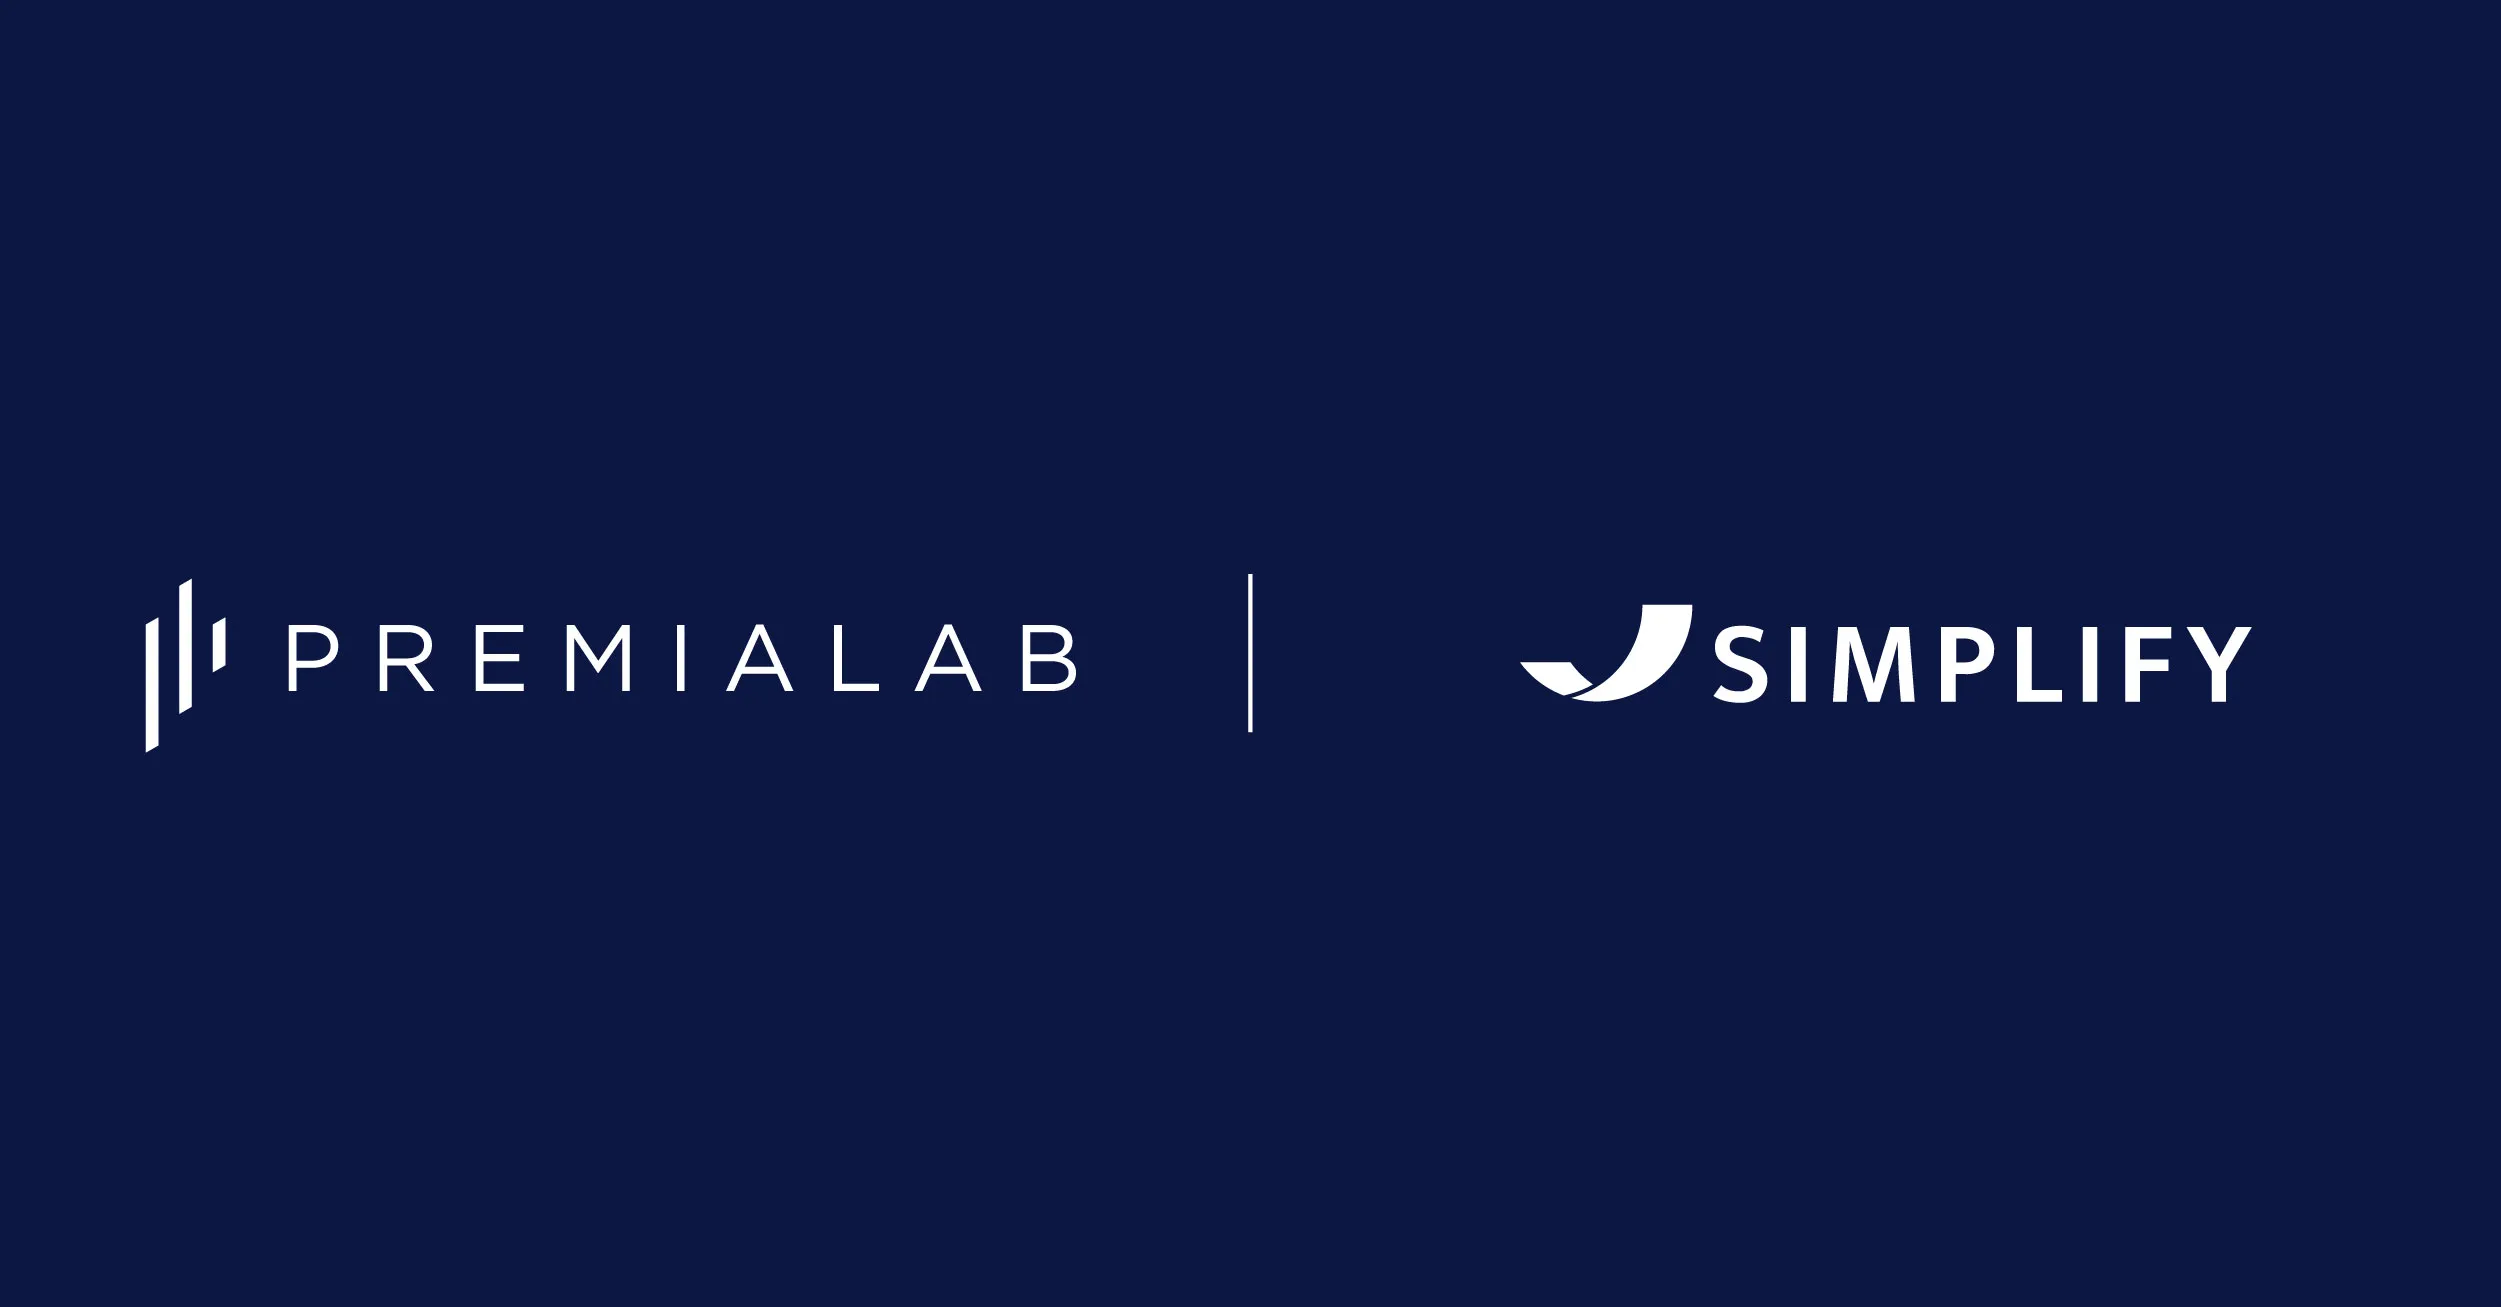 Simplify Asset Management Partners with Premialab